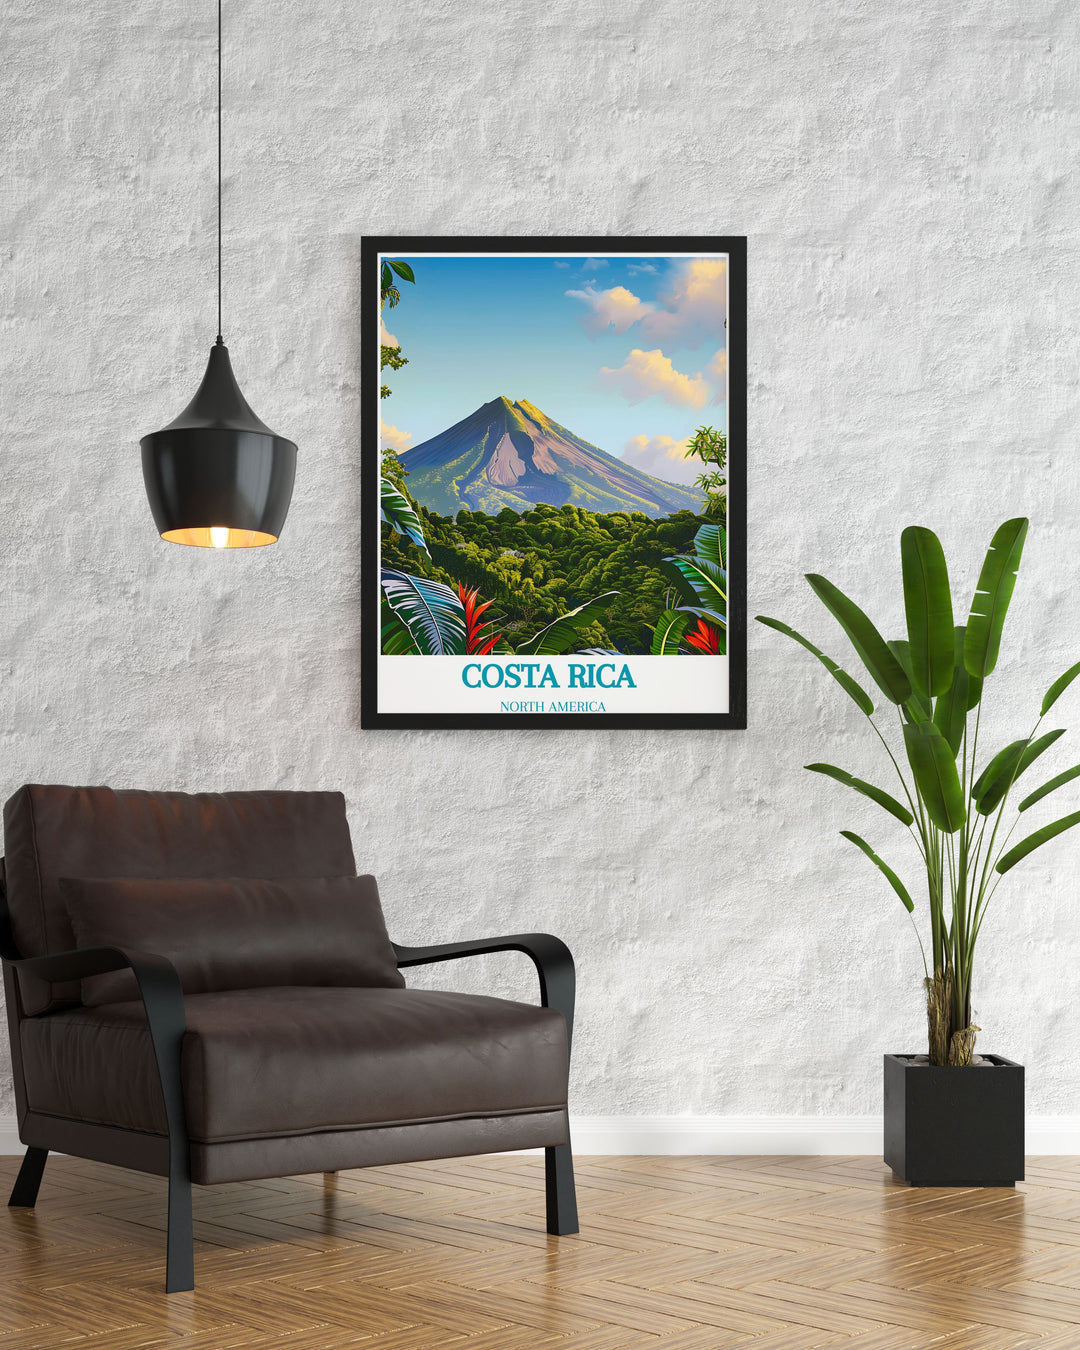 Scenic Costa Rica travel print showcasing the breathtaking views of Arenal Volcano and the vibrant beaches of Saint Teresa, making a perfect gift for anniversaries or birthdays. Brings the beauty of Costa Rica into your home.